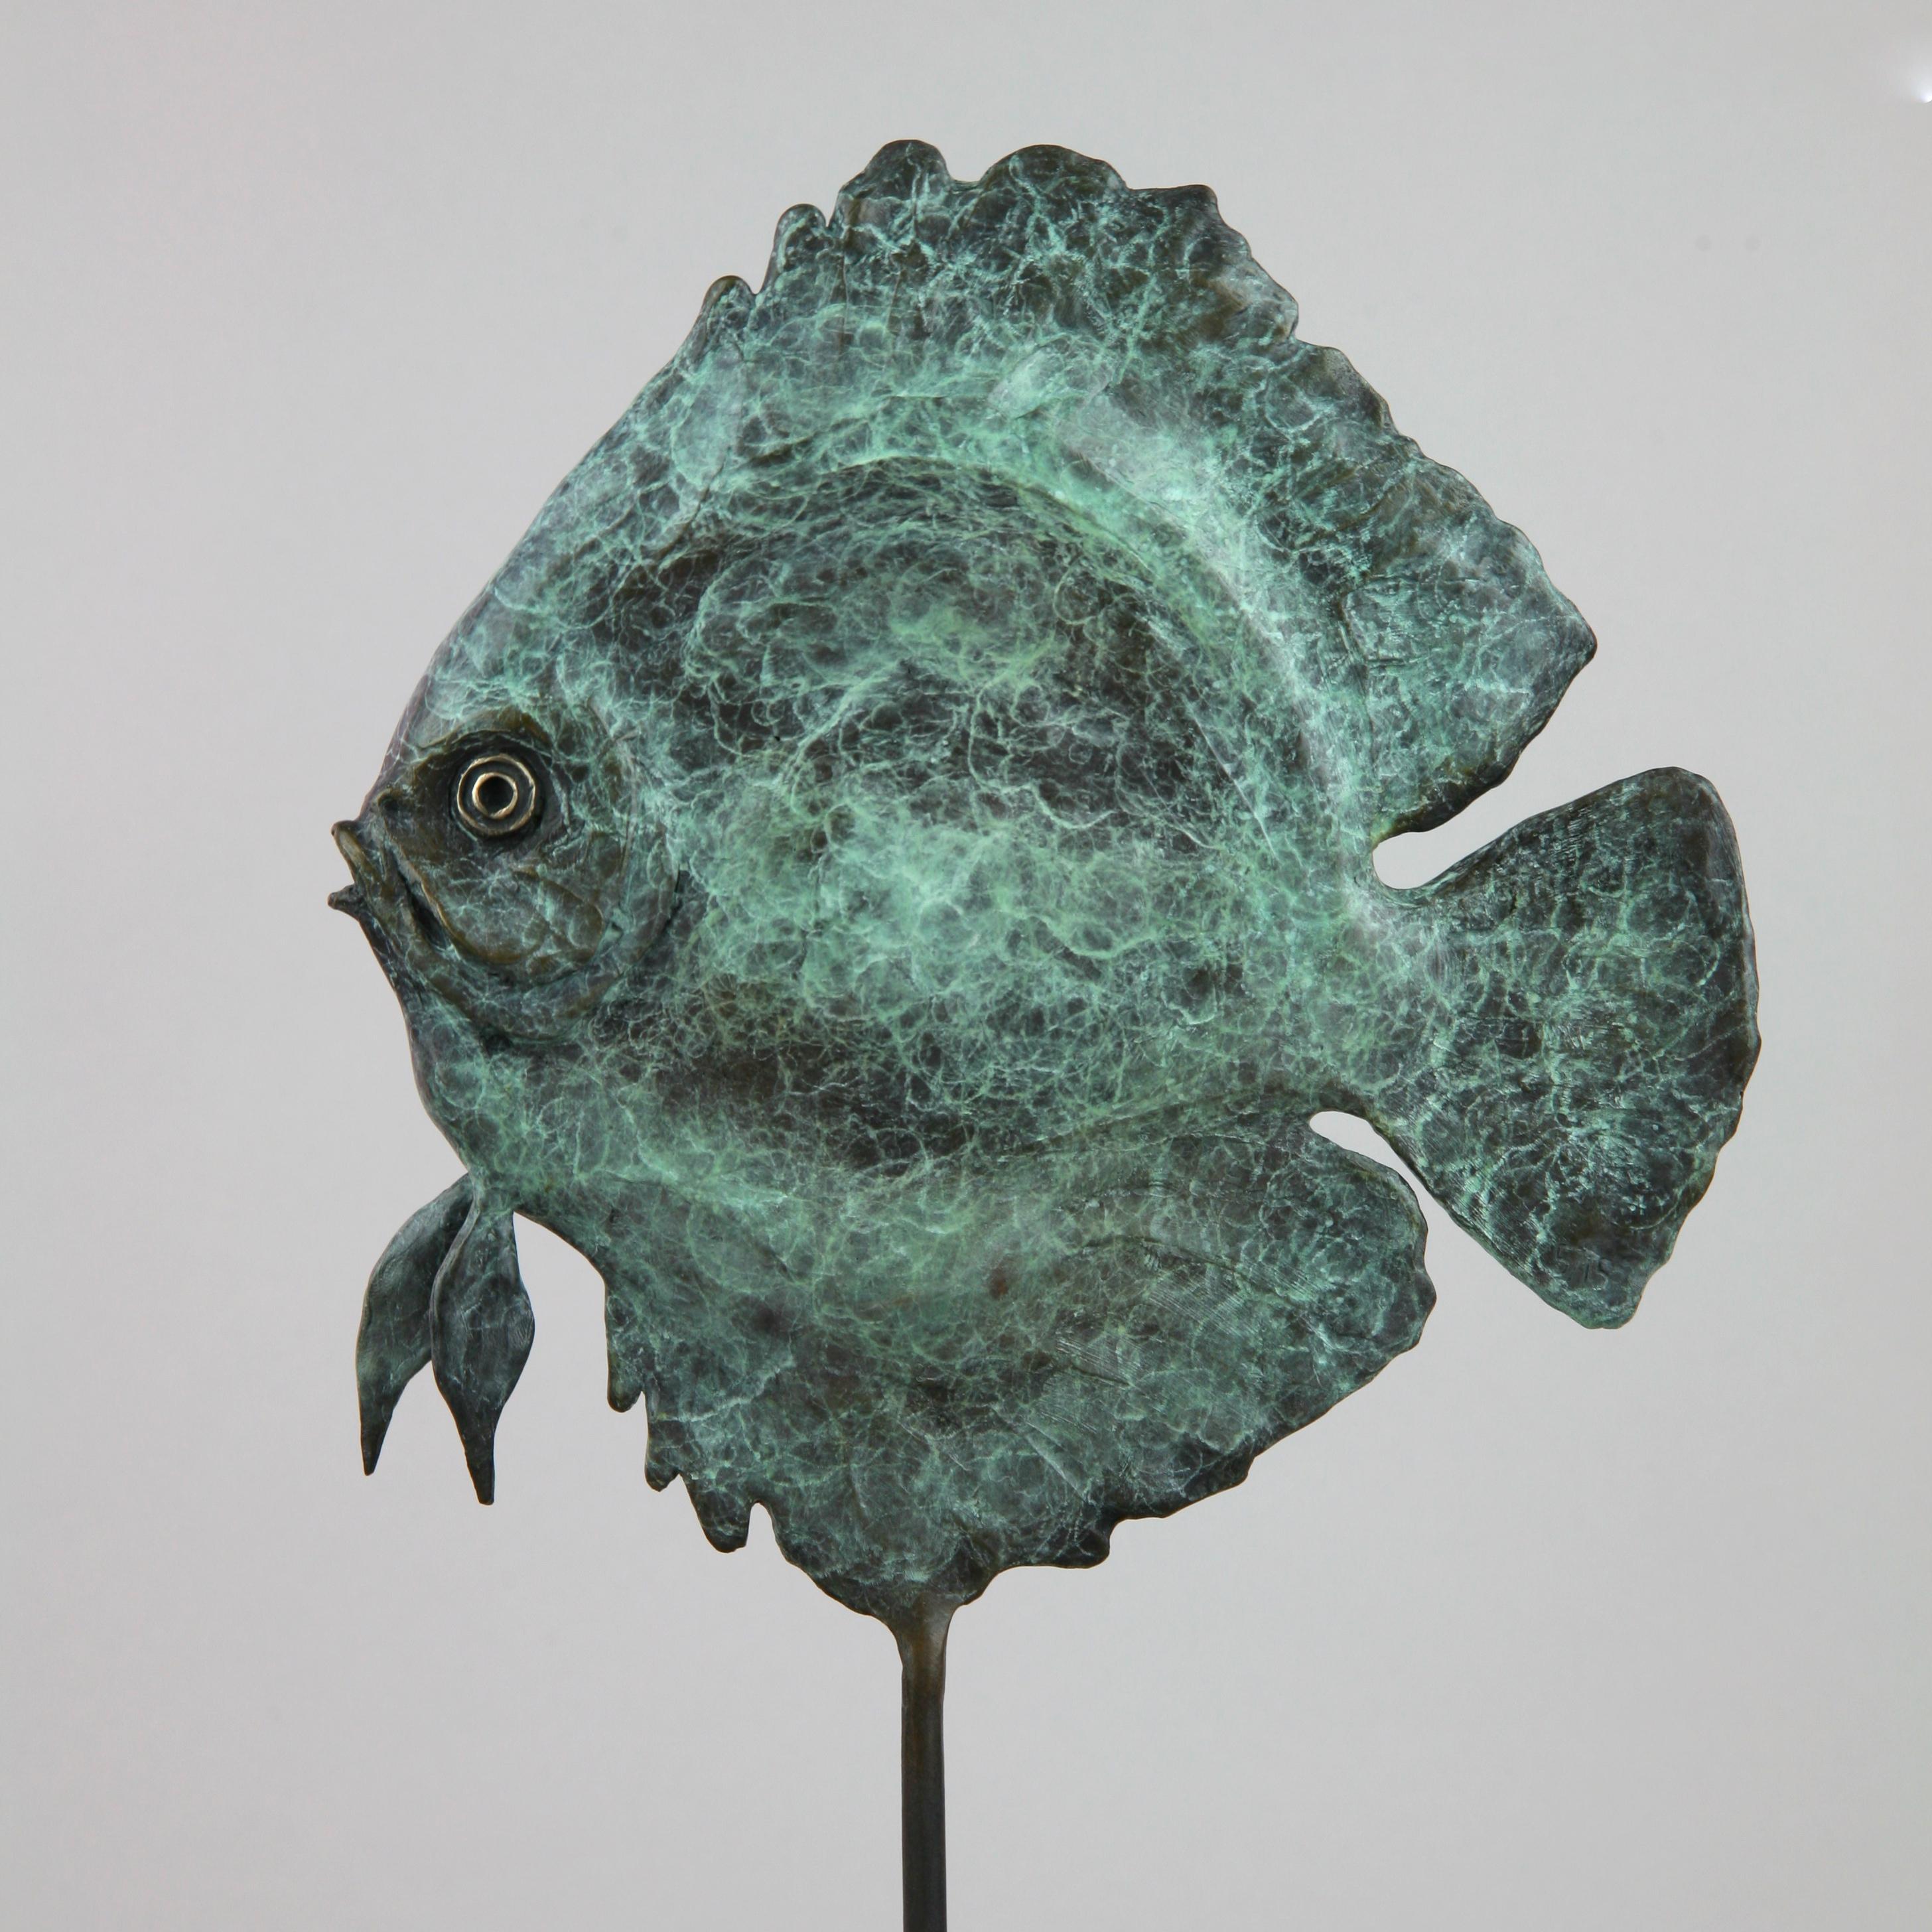 Discus Fish - Wildlife bronze green fish sculpture limited edition modern art - Abstract Impressionist Sculpture by Andrzej Szymczyk